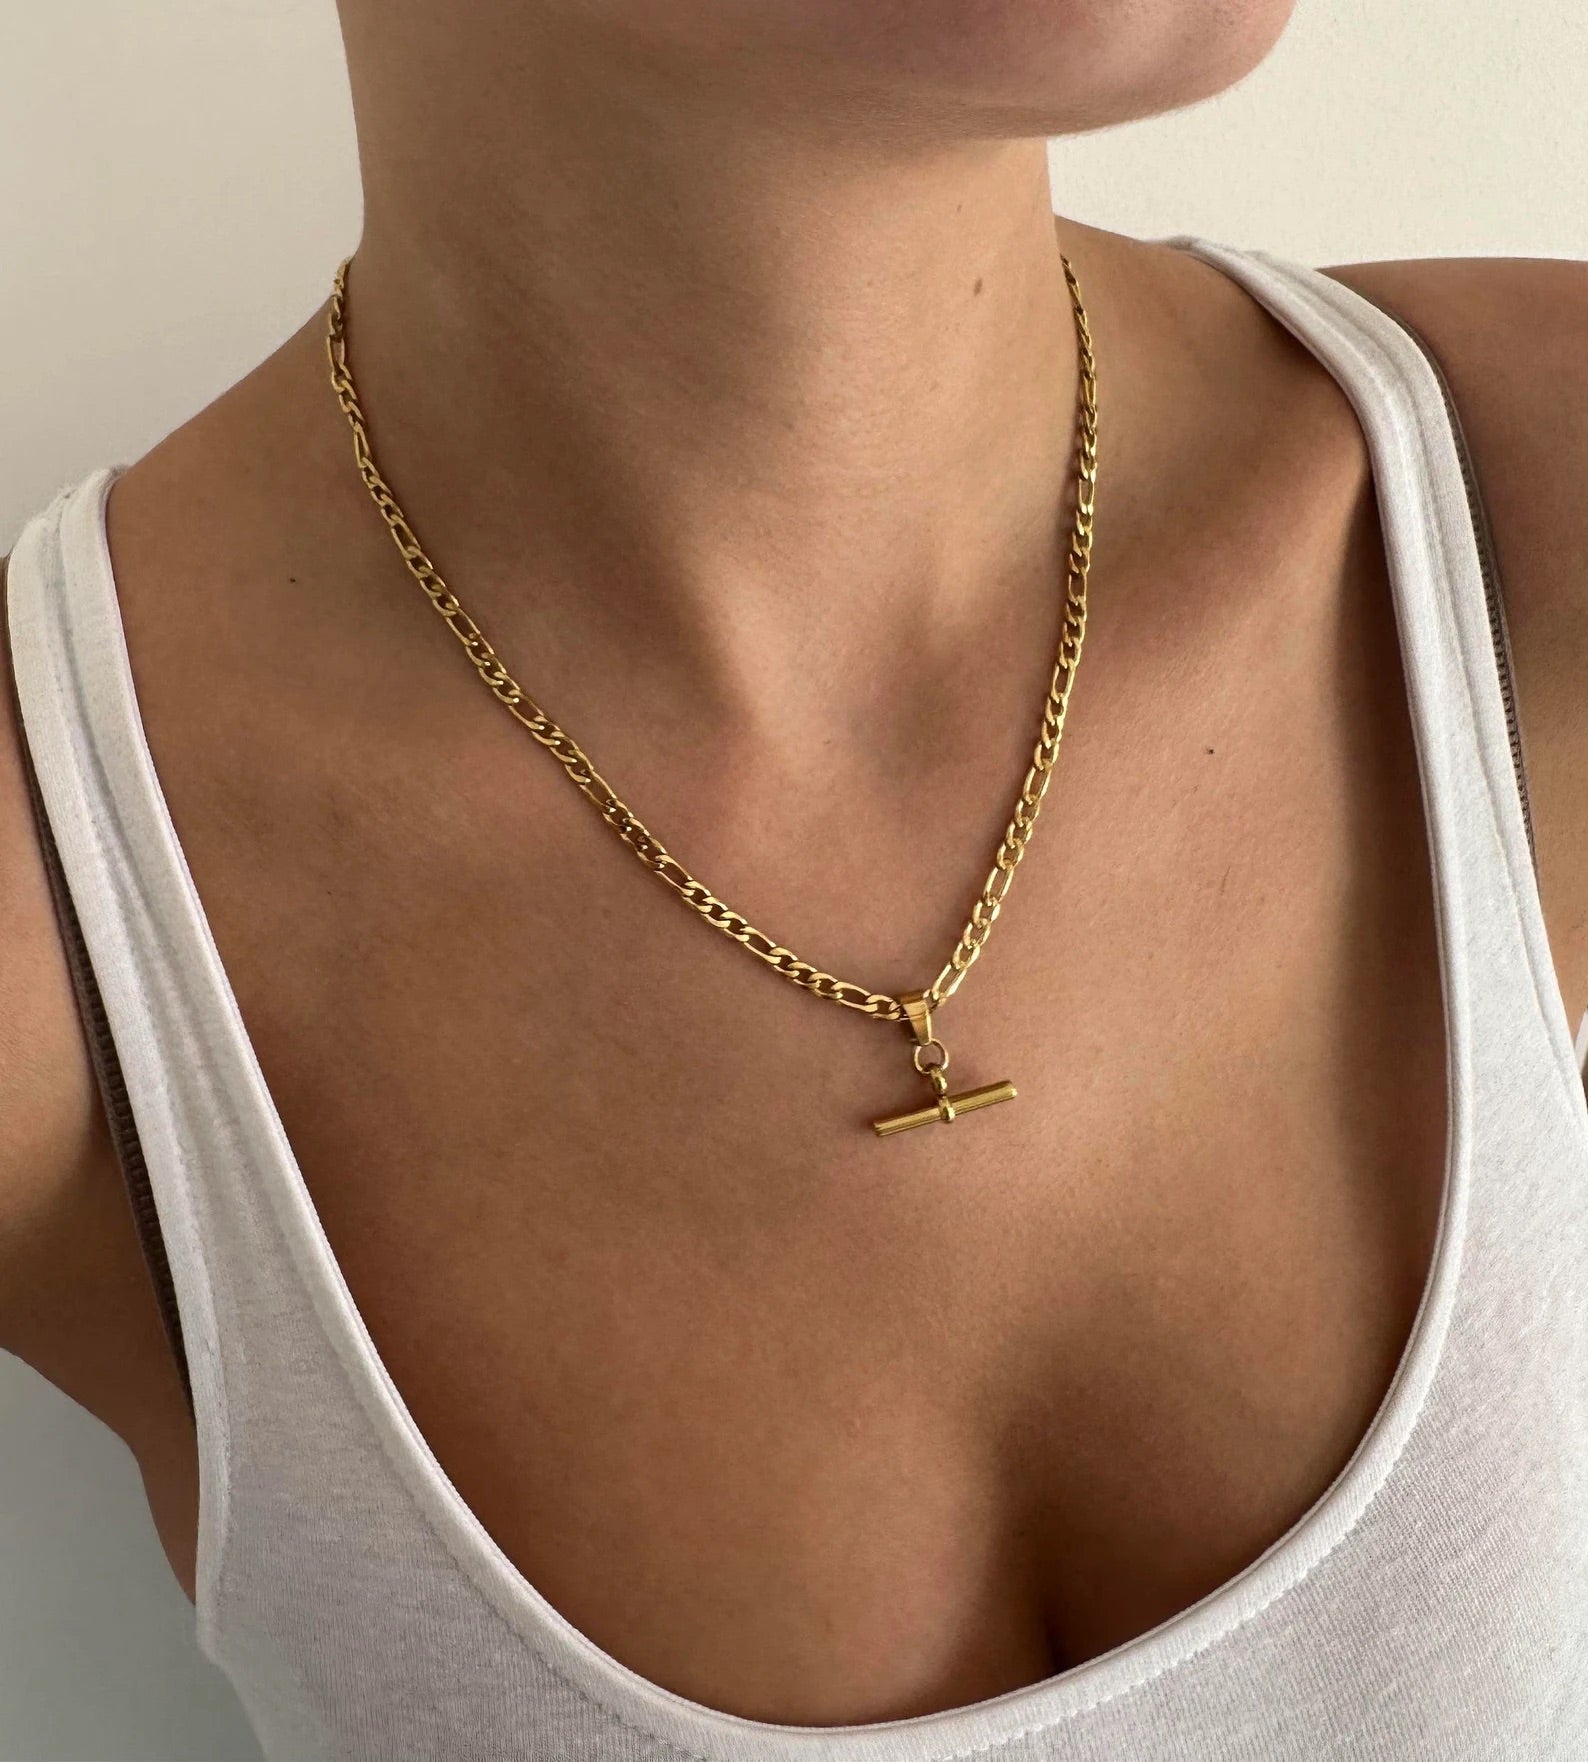 Gold T Bar Necklace is perfect statement piece 